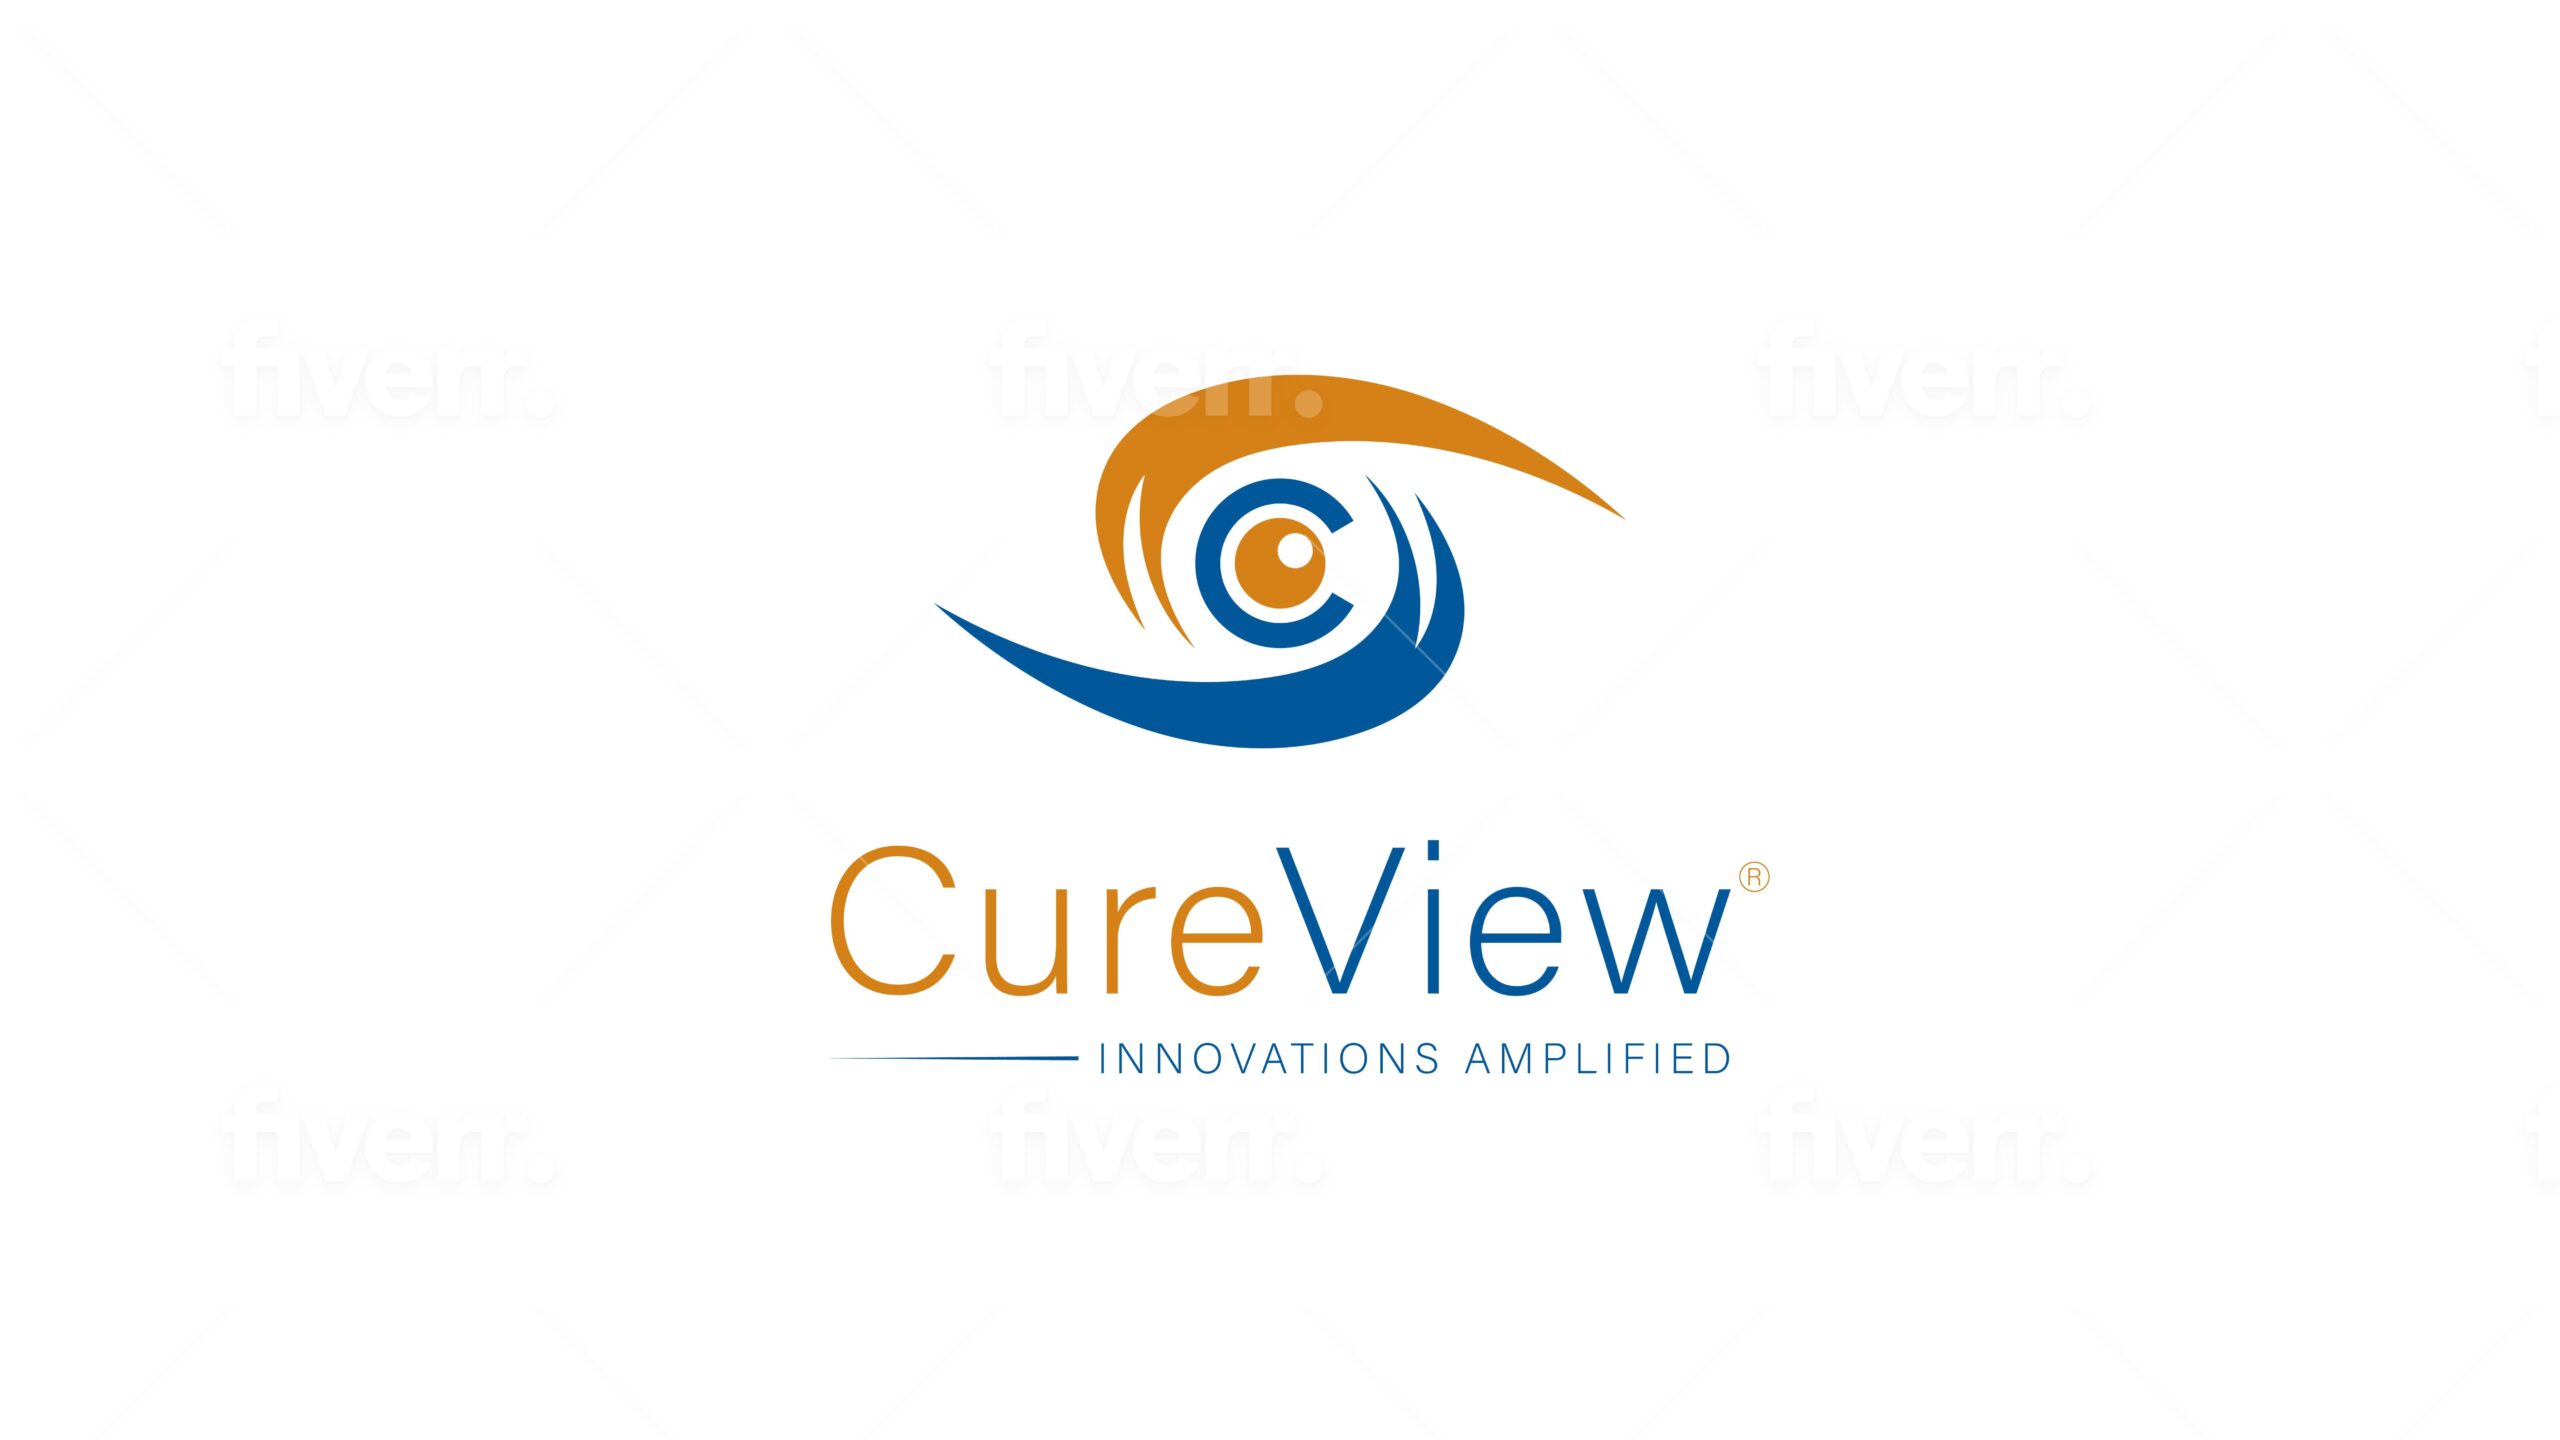 CureView – A finalist for Emerging Rehabilitation Technology of the Year